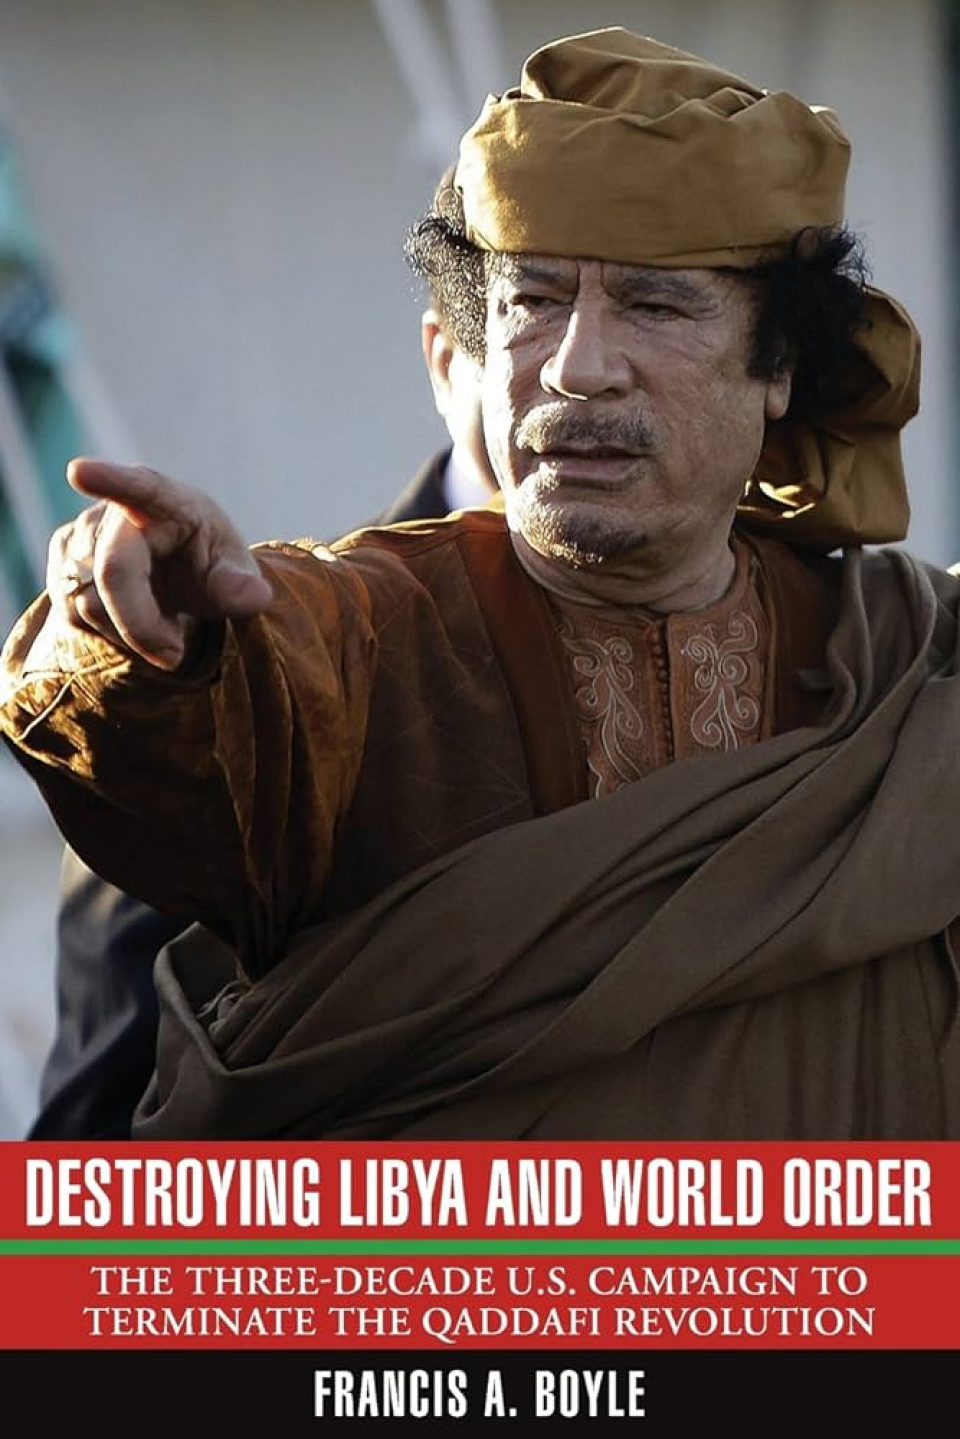 Destroying Libya and World Order: The Three-Decade US Campaign to Terminate the Qaddafi Revolution